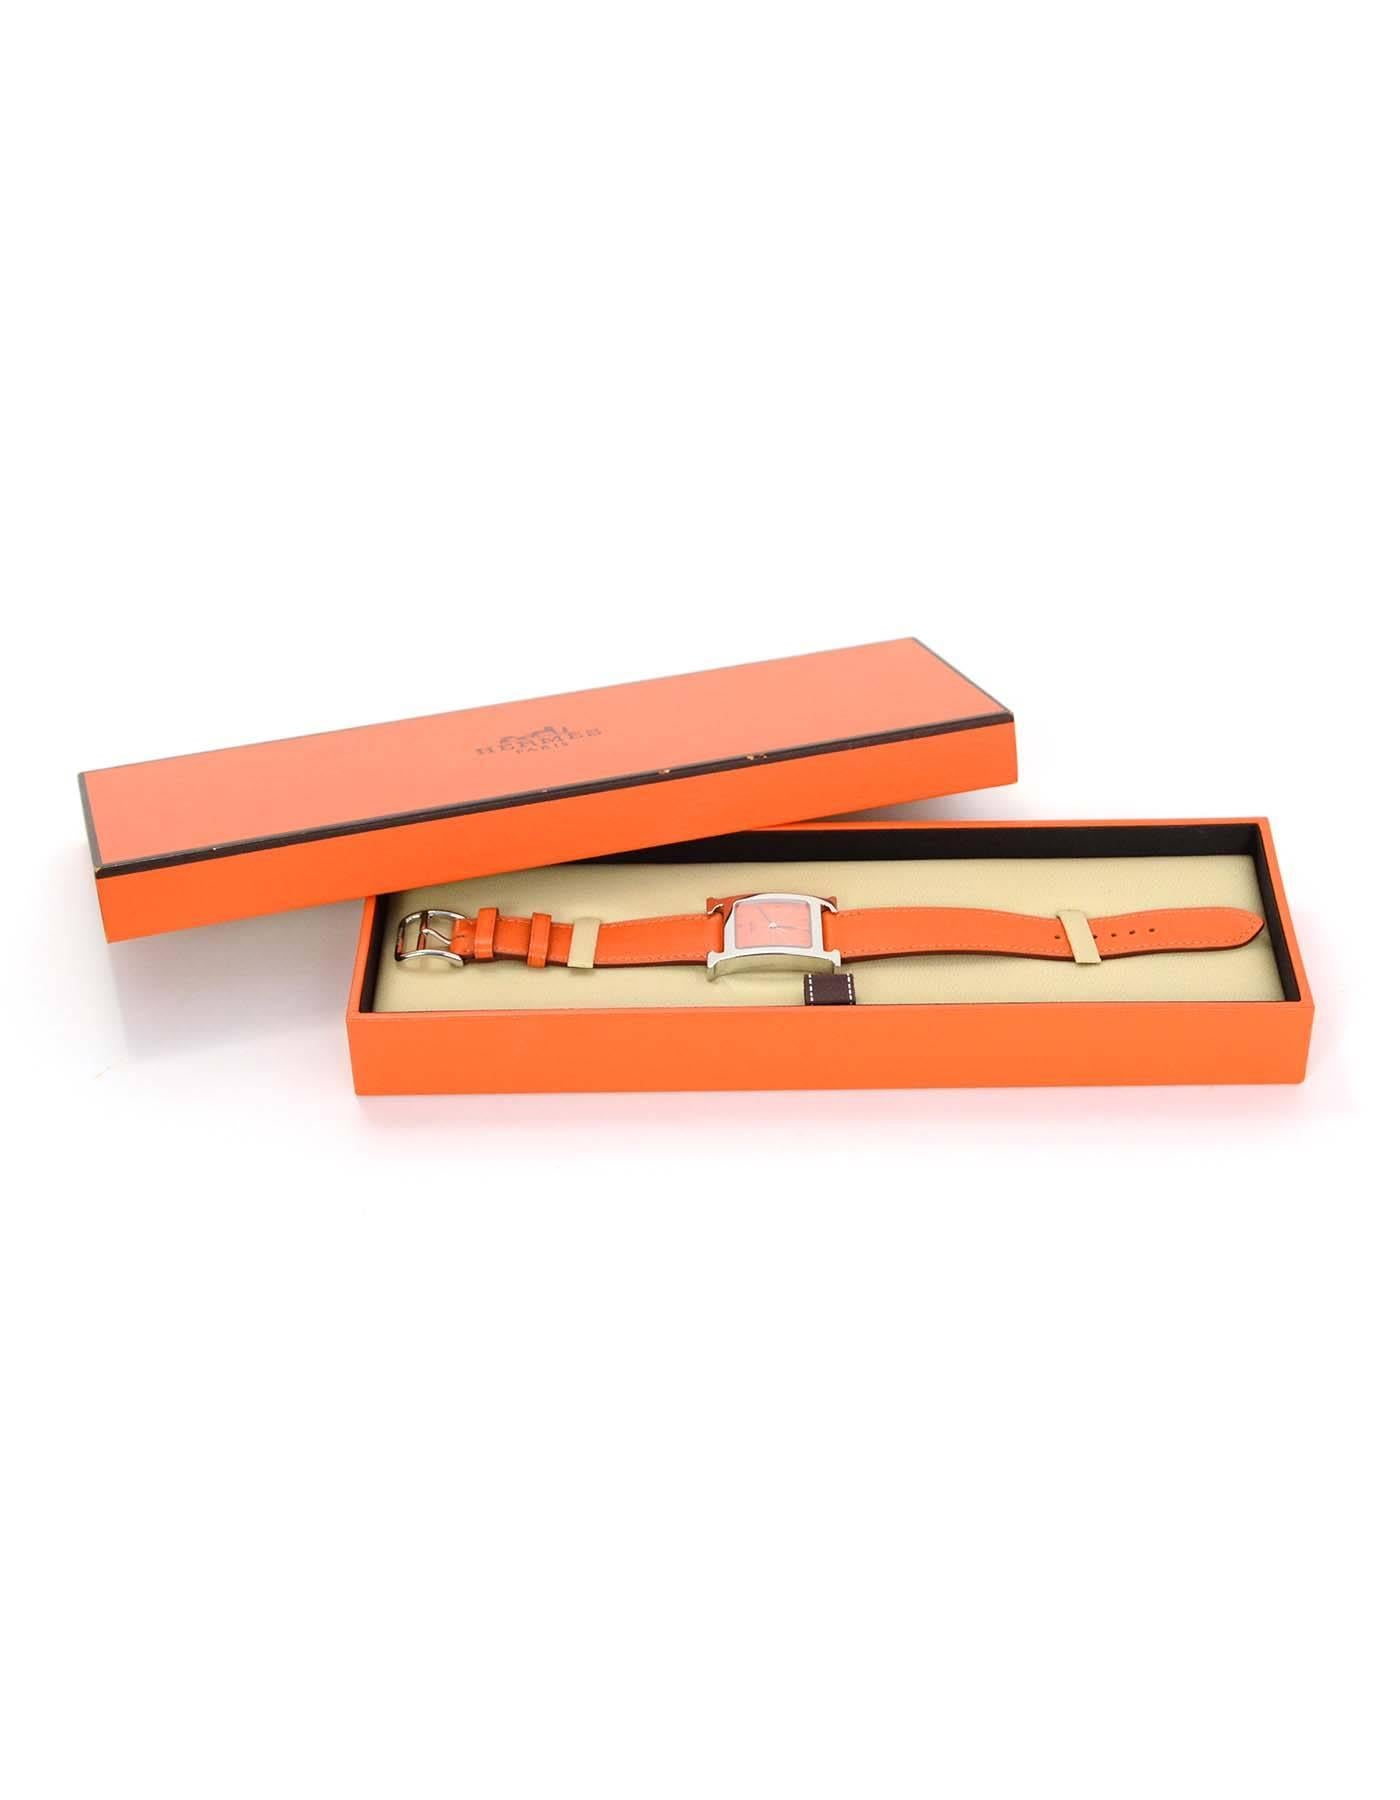 Hermes Orange Leather and Stainless H Heure Hour MM Watch rt. $2, 725 3